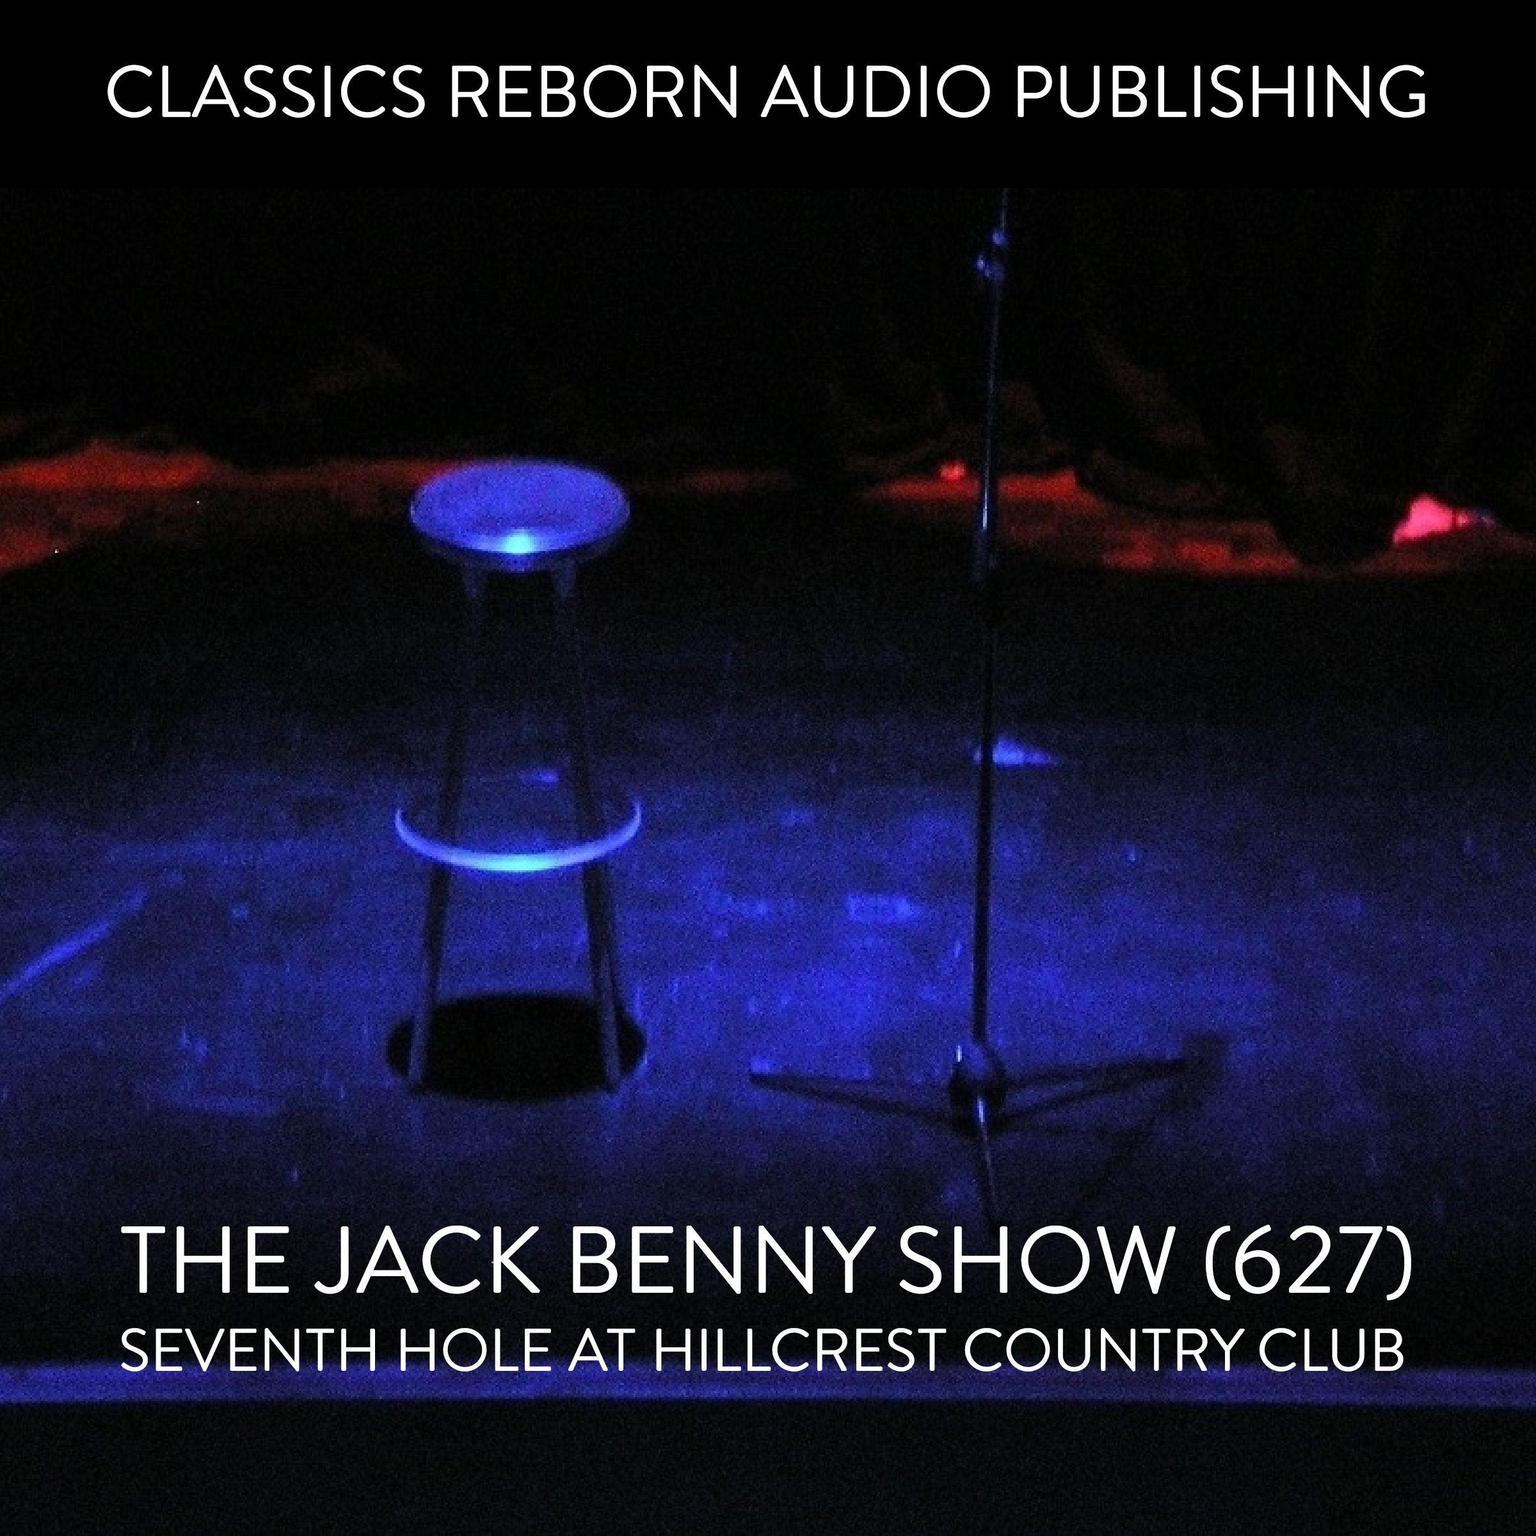 The Jack Benny Show (627) Seventh Hole at Hillcrest Country Club Audiobook, by Classics Reborn Audio Publishing